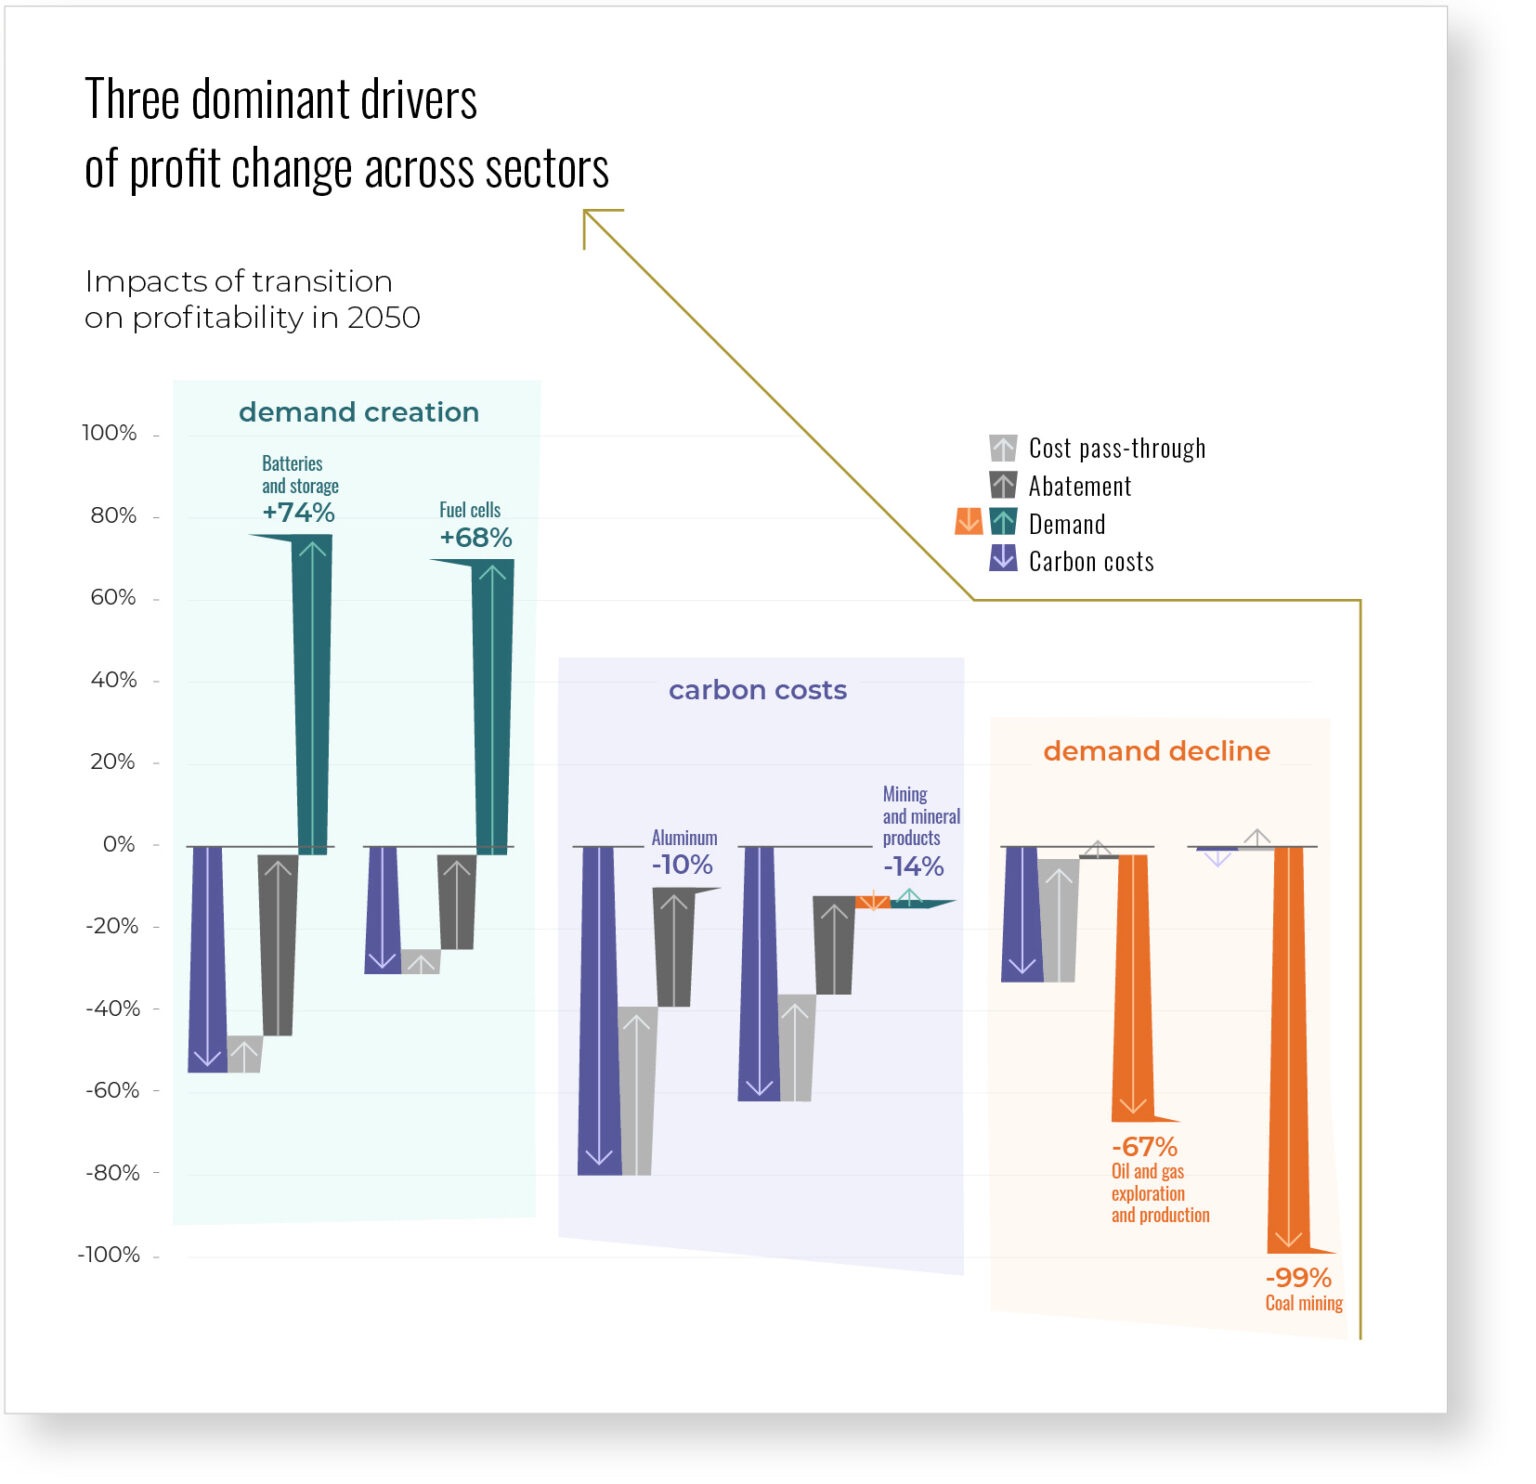 Visualization of the graph highlighting the three main drivers of future profitability by sector. Divided into three zones, the graph separates the sectors belonging to the demand creation (green), climate policies (purple) and demand decline (orange) zone.